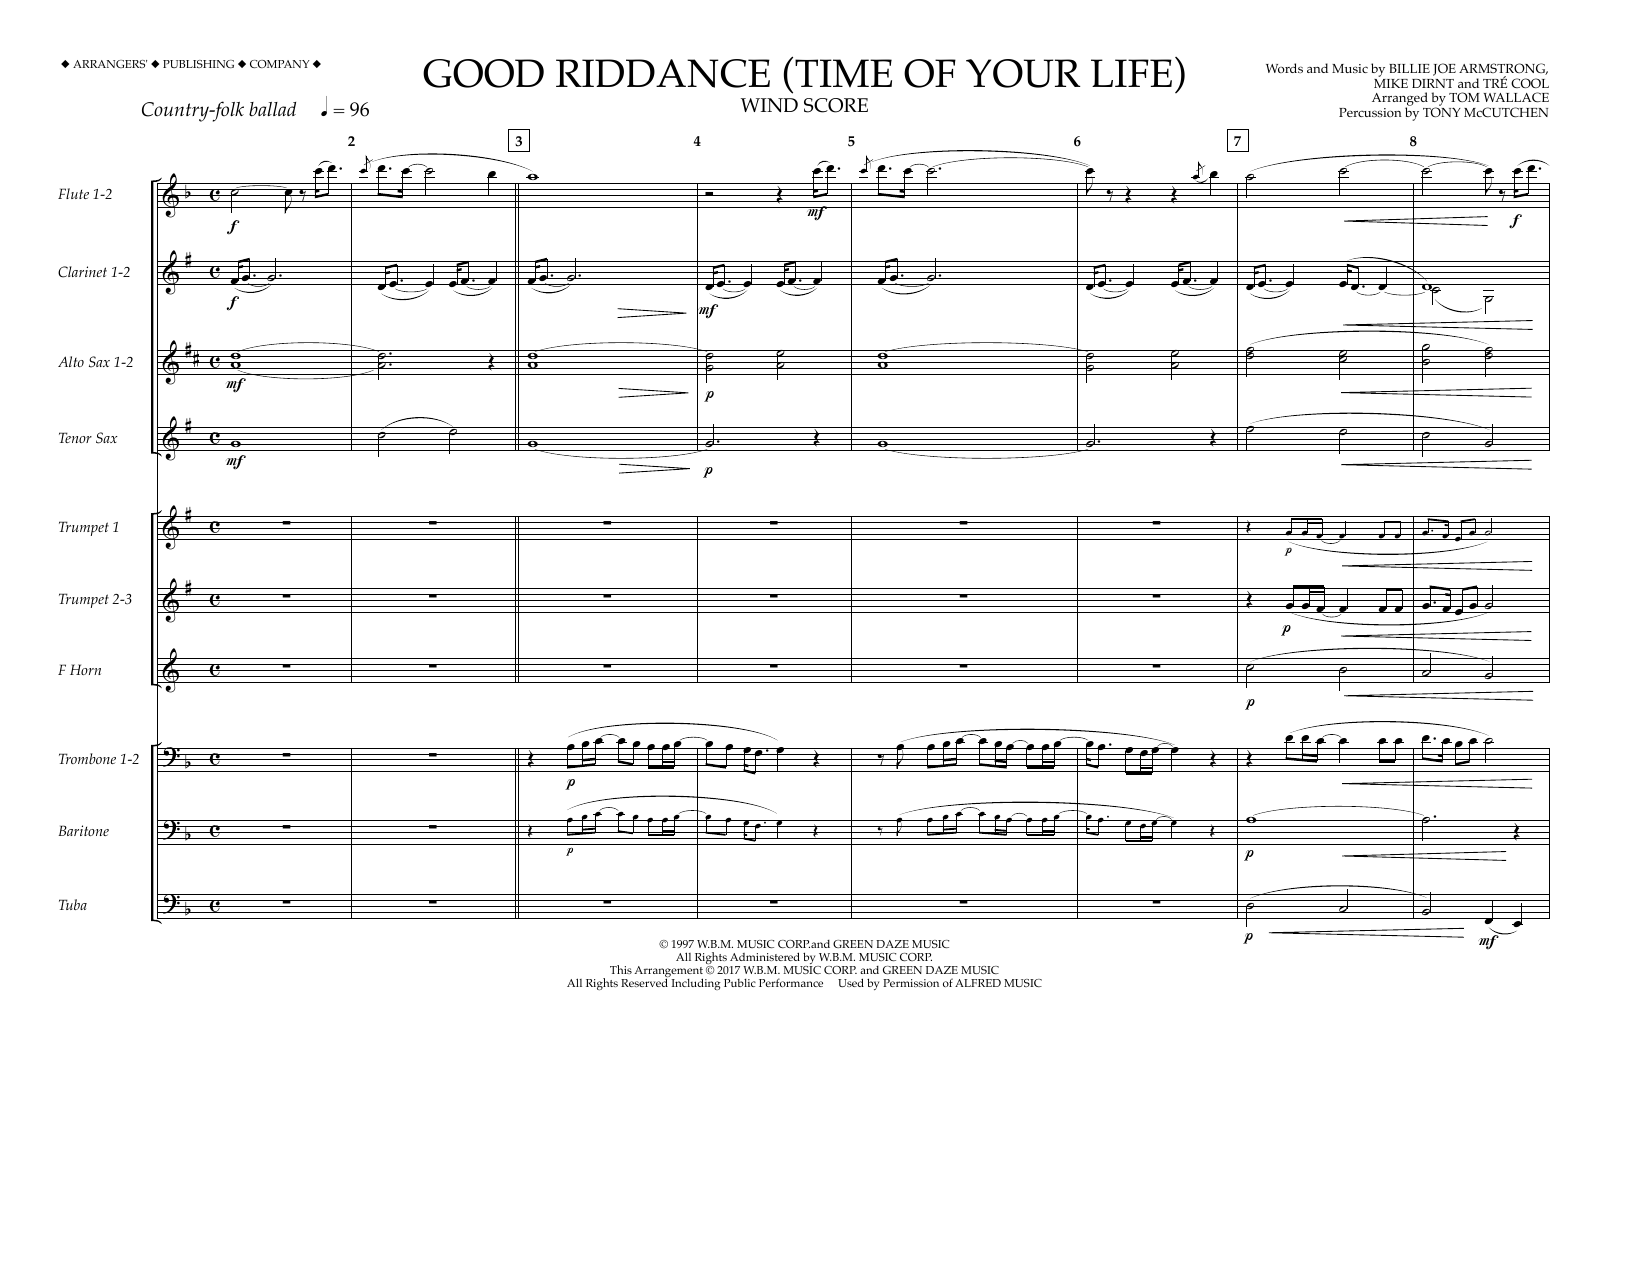 Download Tom Wallace Good Riddance (Time of Your Life) - Win Sheet Music